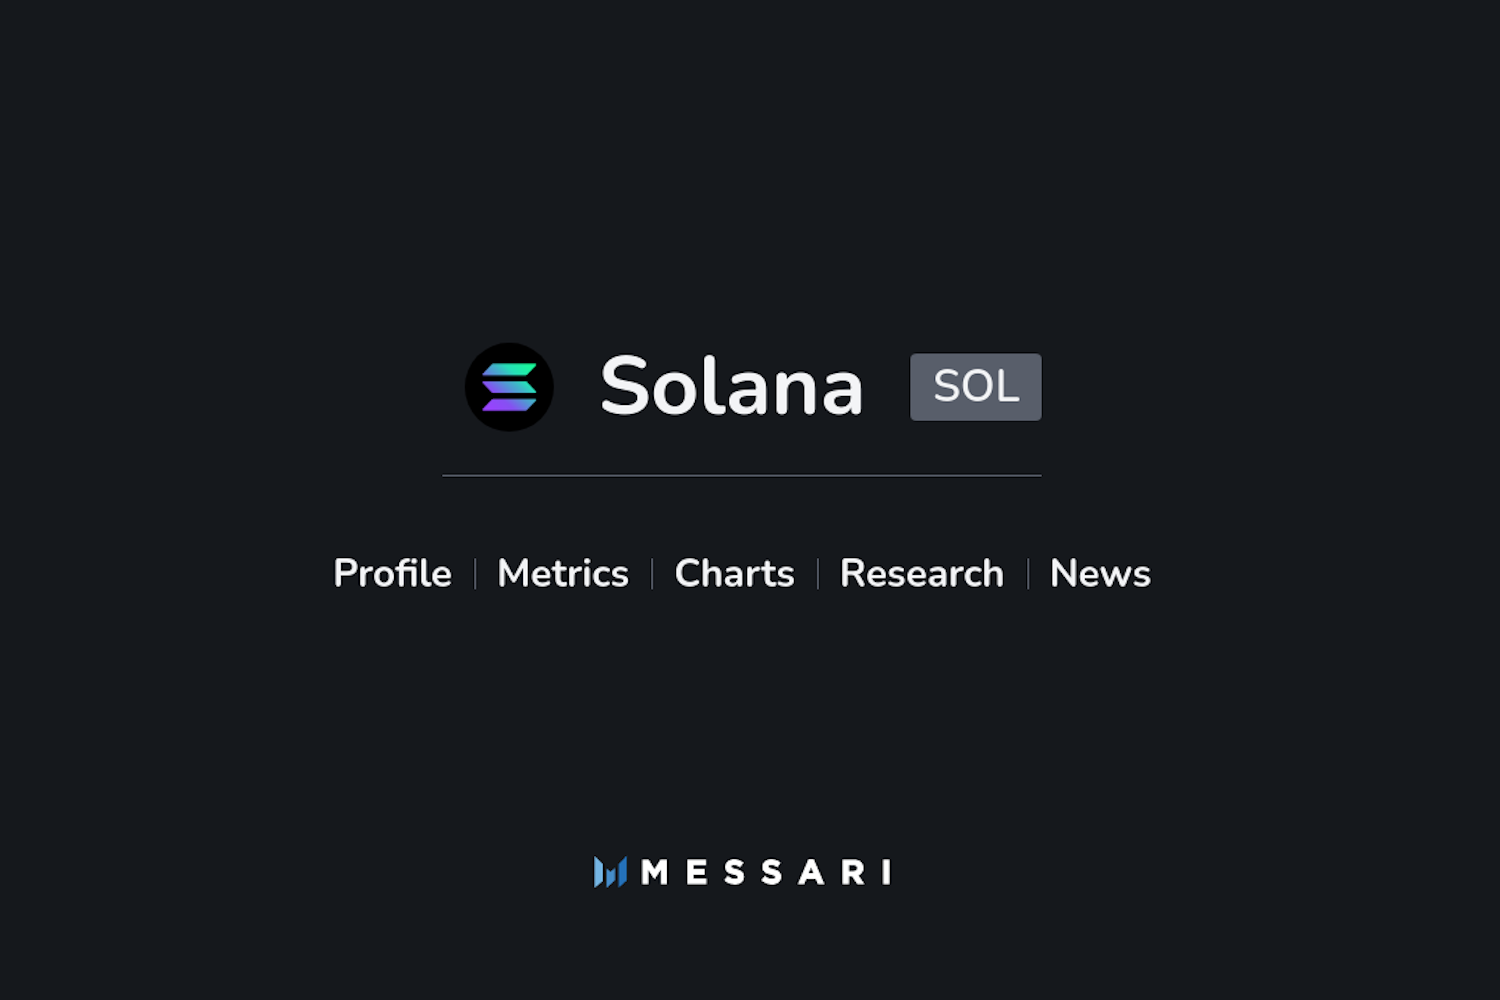 Solana's Q1 Report by Messari Highlights Rapid Growth and Ecosystem Expansion